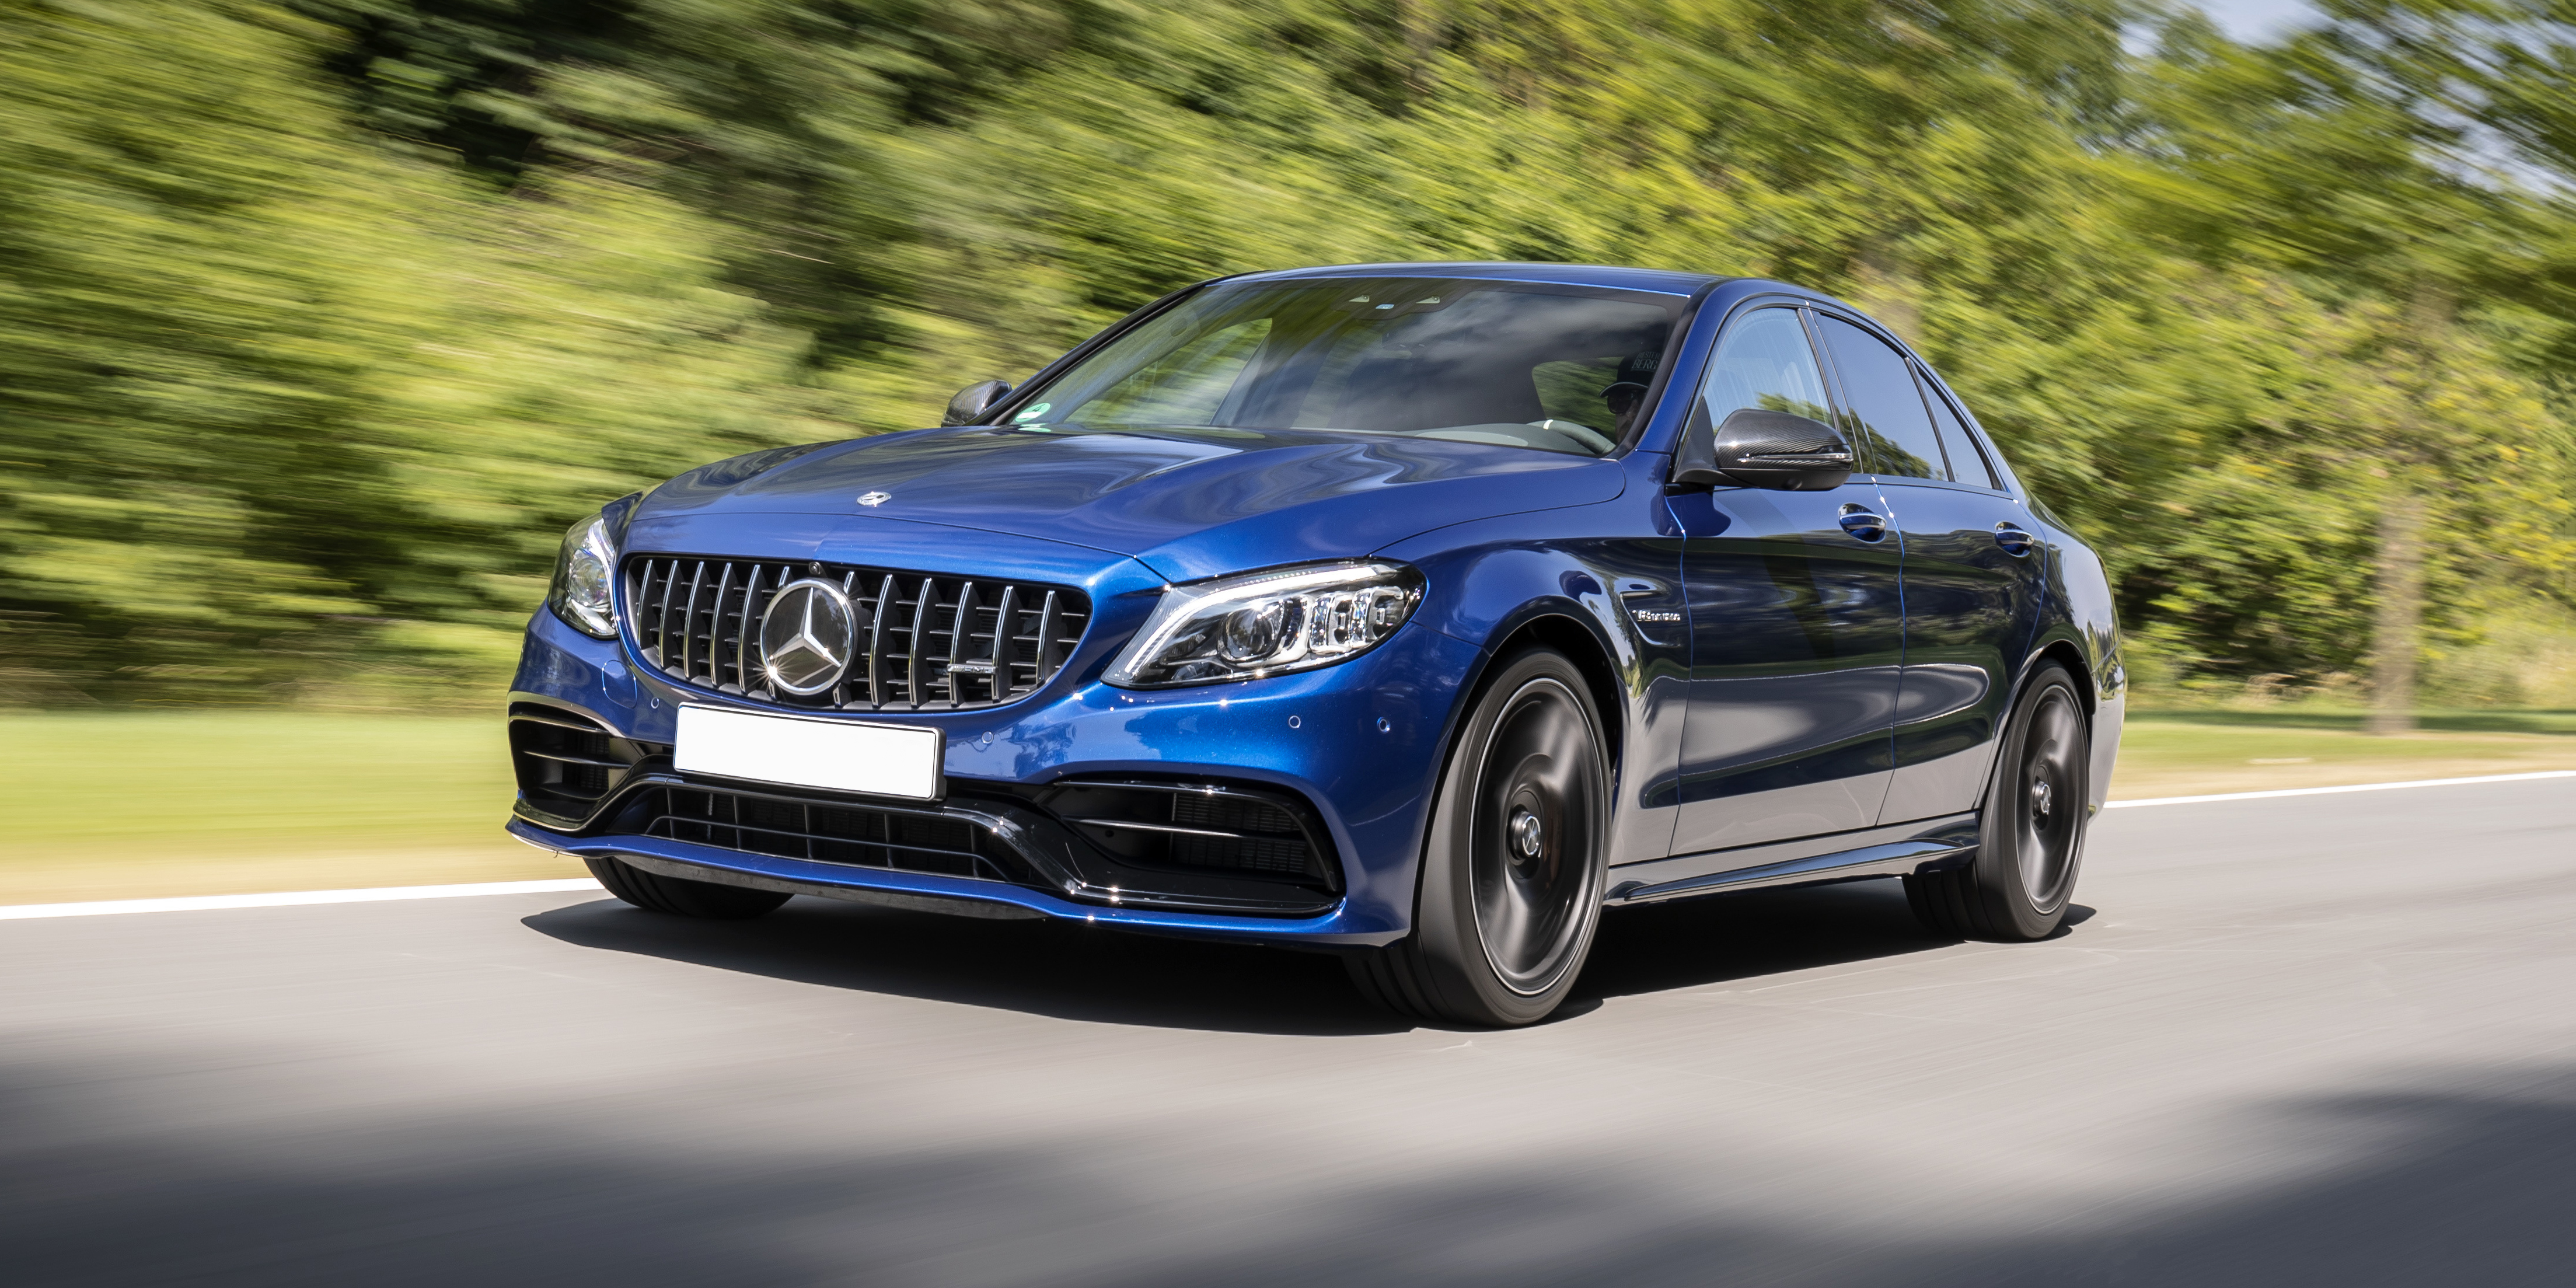 Mercedes Amg C63 Saloon Review 21 Carwow